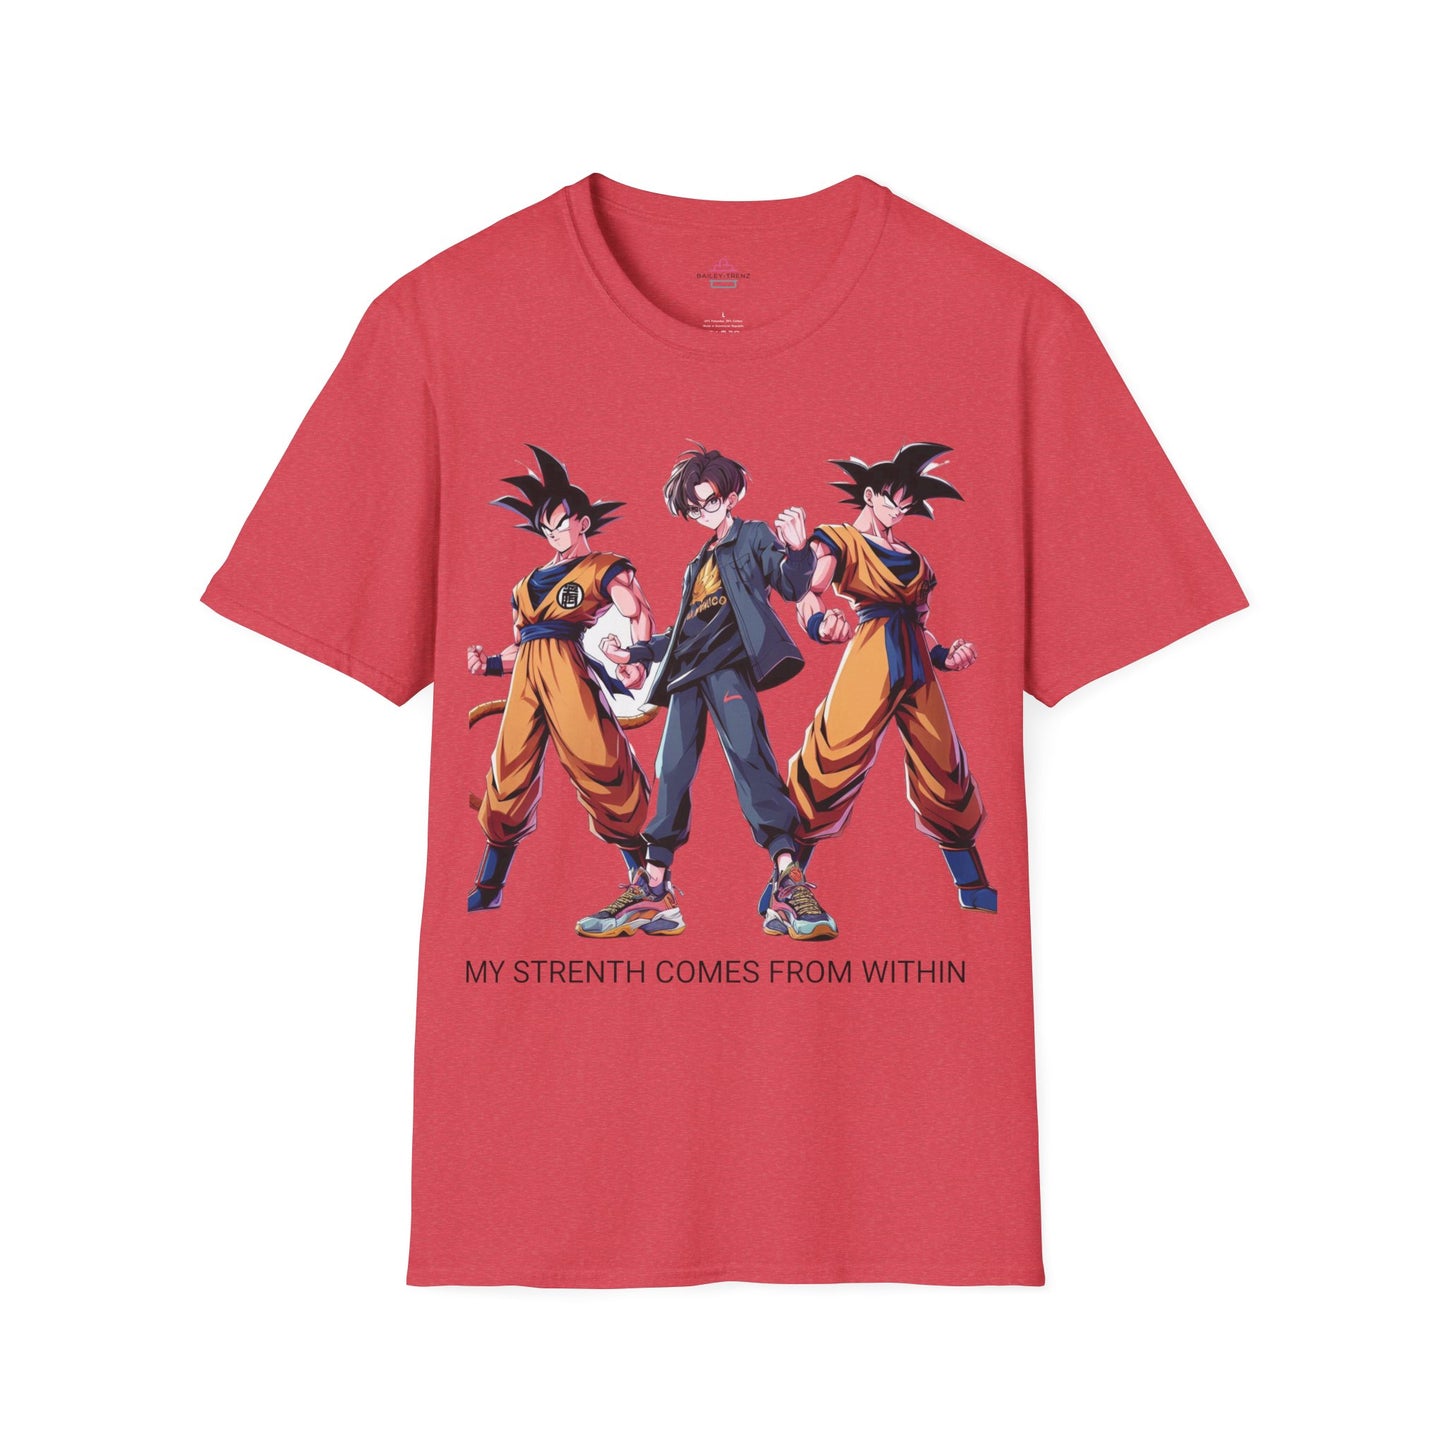 Goku Believe in You" Unisex Soft style T-Shirt - Embrace the Power Within!